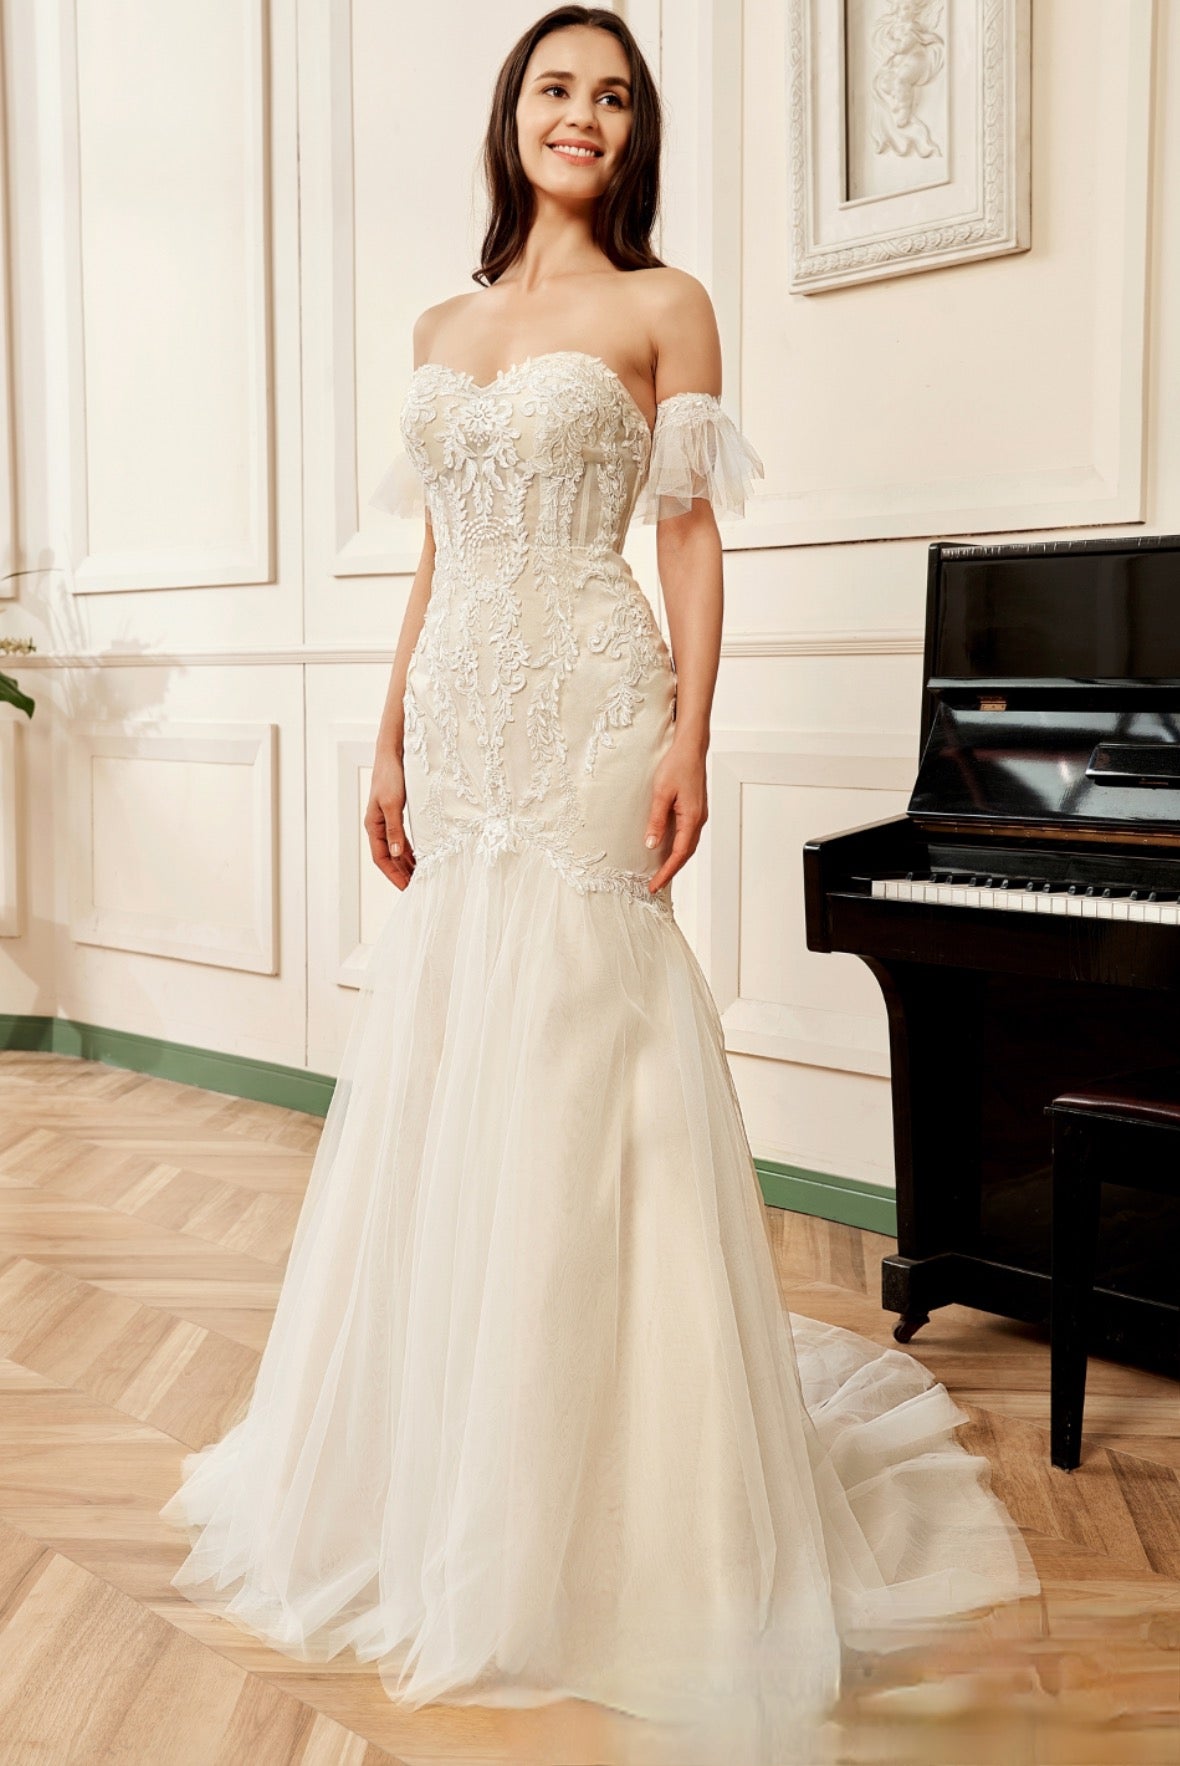 Strapless Mermaid Wedding Gown With Detachable Tulle Sleeve